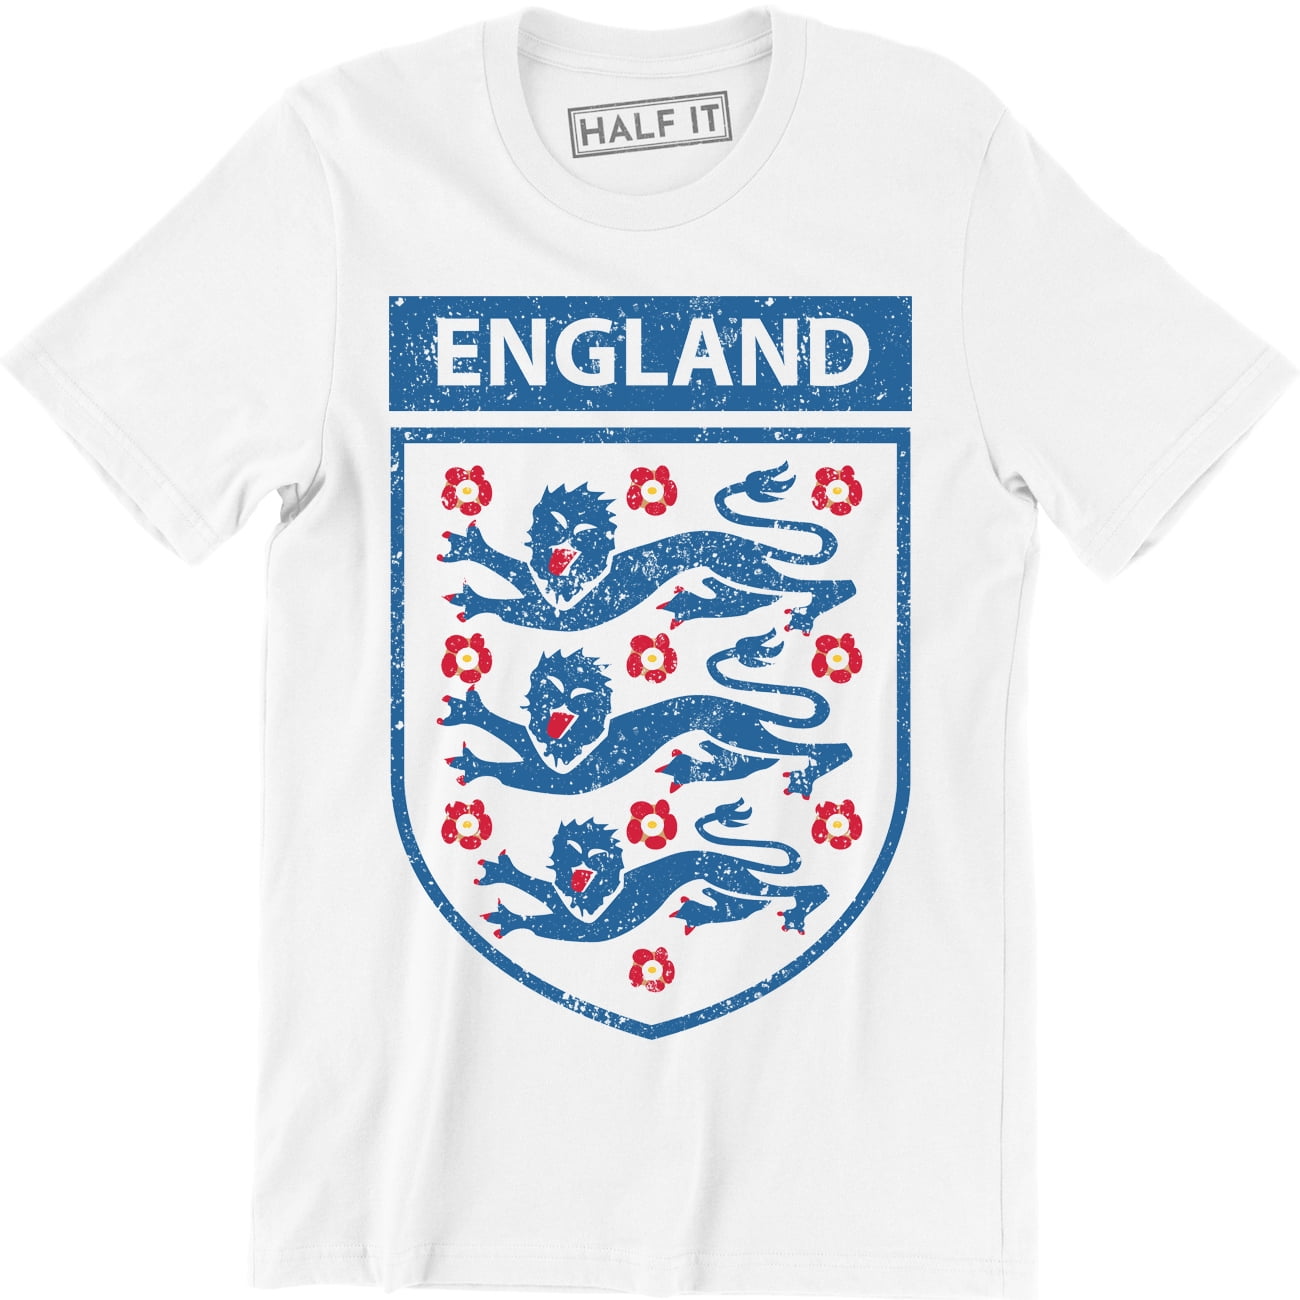 England Flag Soccer Ball English Country Three Lions Born From GBR Men's T-Shirt